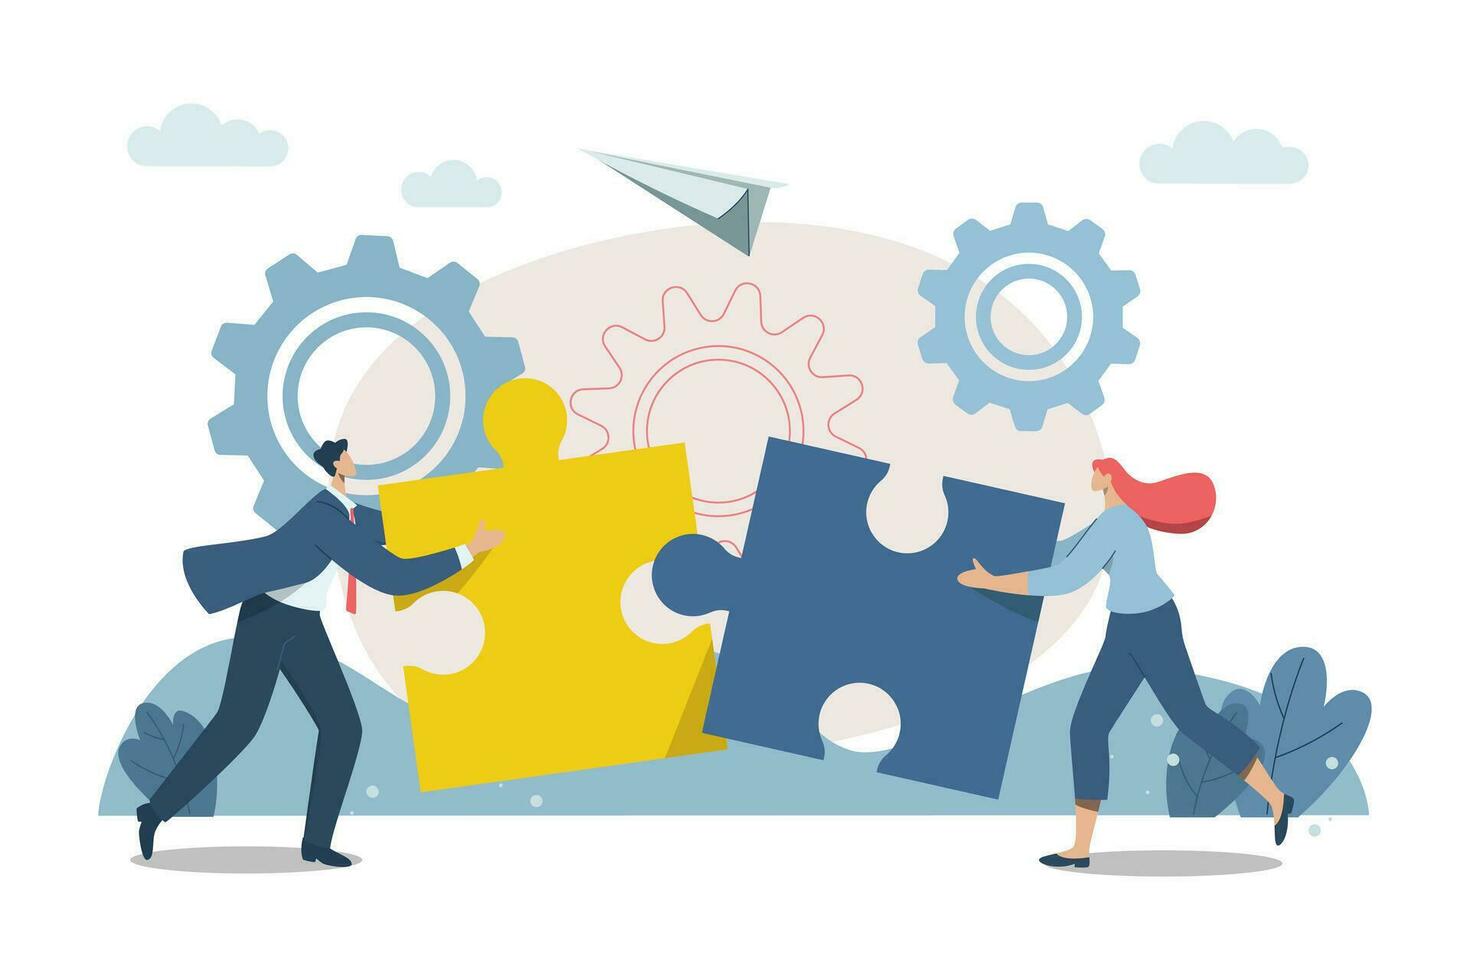 Effective teamwork, problem solving, or ways to improve, career development concept, symbol of teamwork, Business people work together to complete jigsaw puzzle in harmony. Vector design illustration.